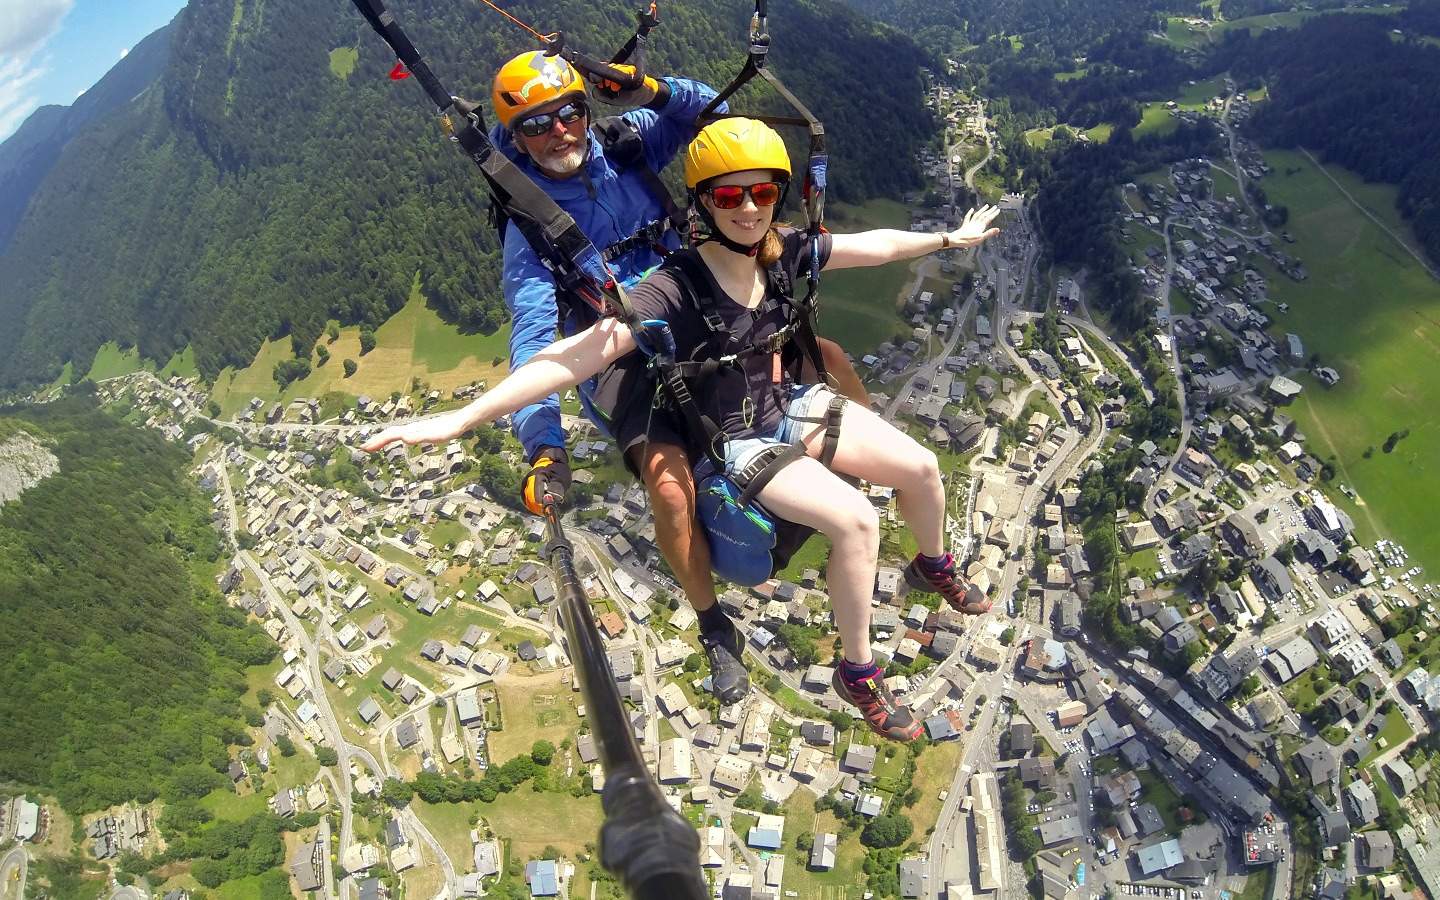 Paragliding/parapenting in Morzine in summer, French Alps